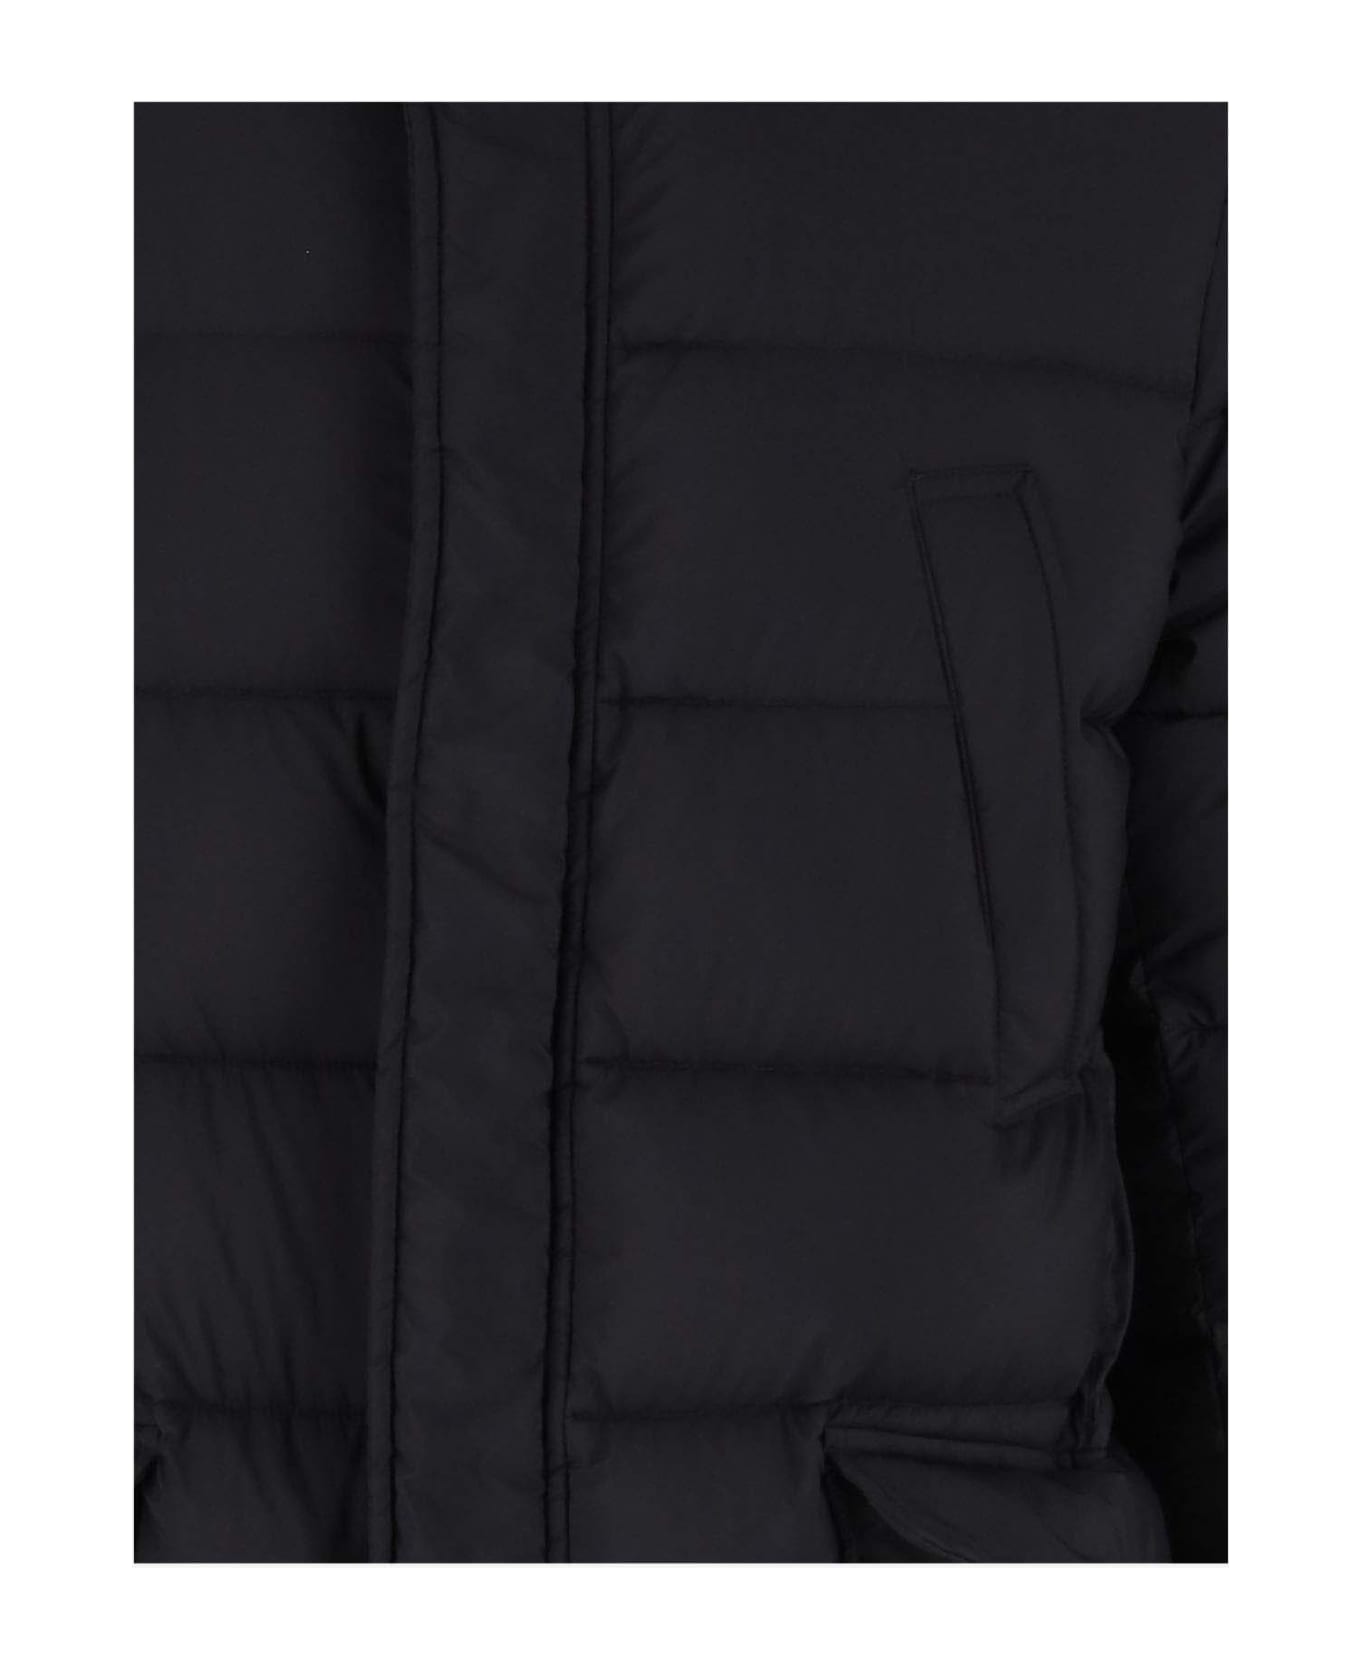 Herno Hooded Down Jacket Herno - BLUE